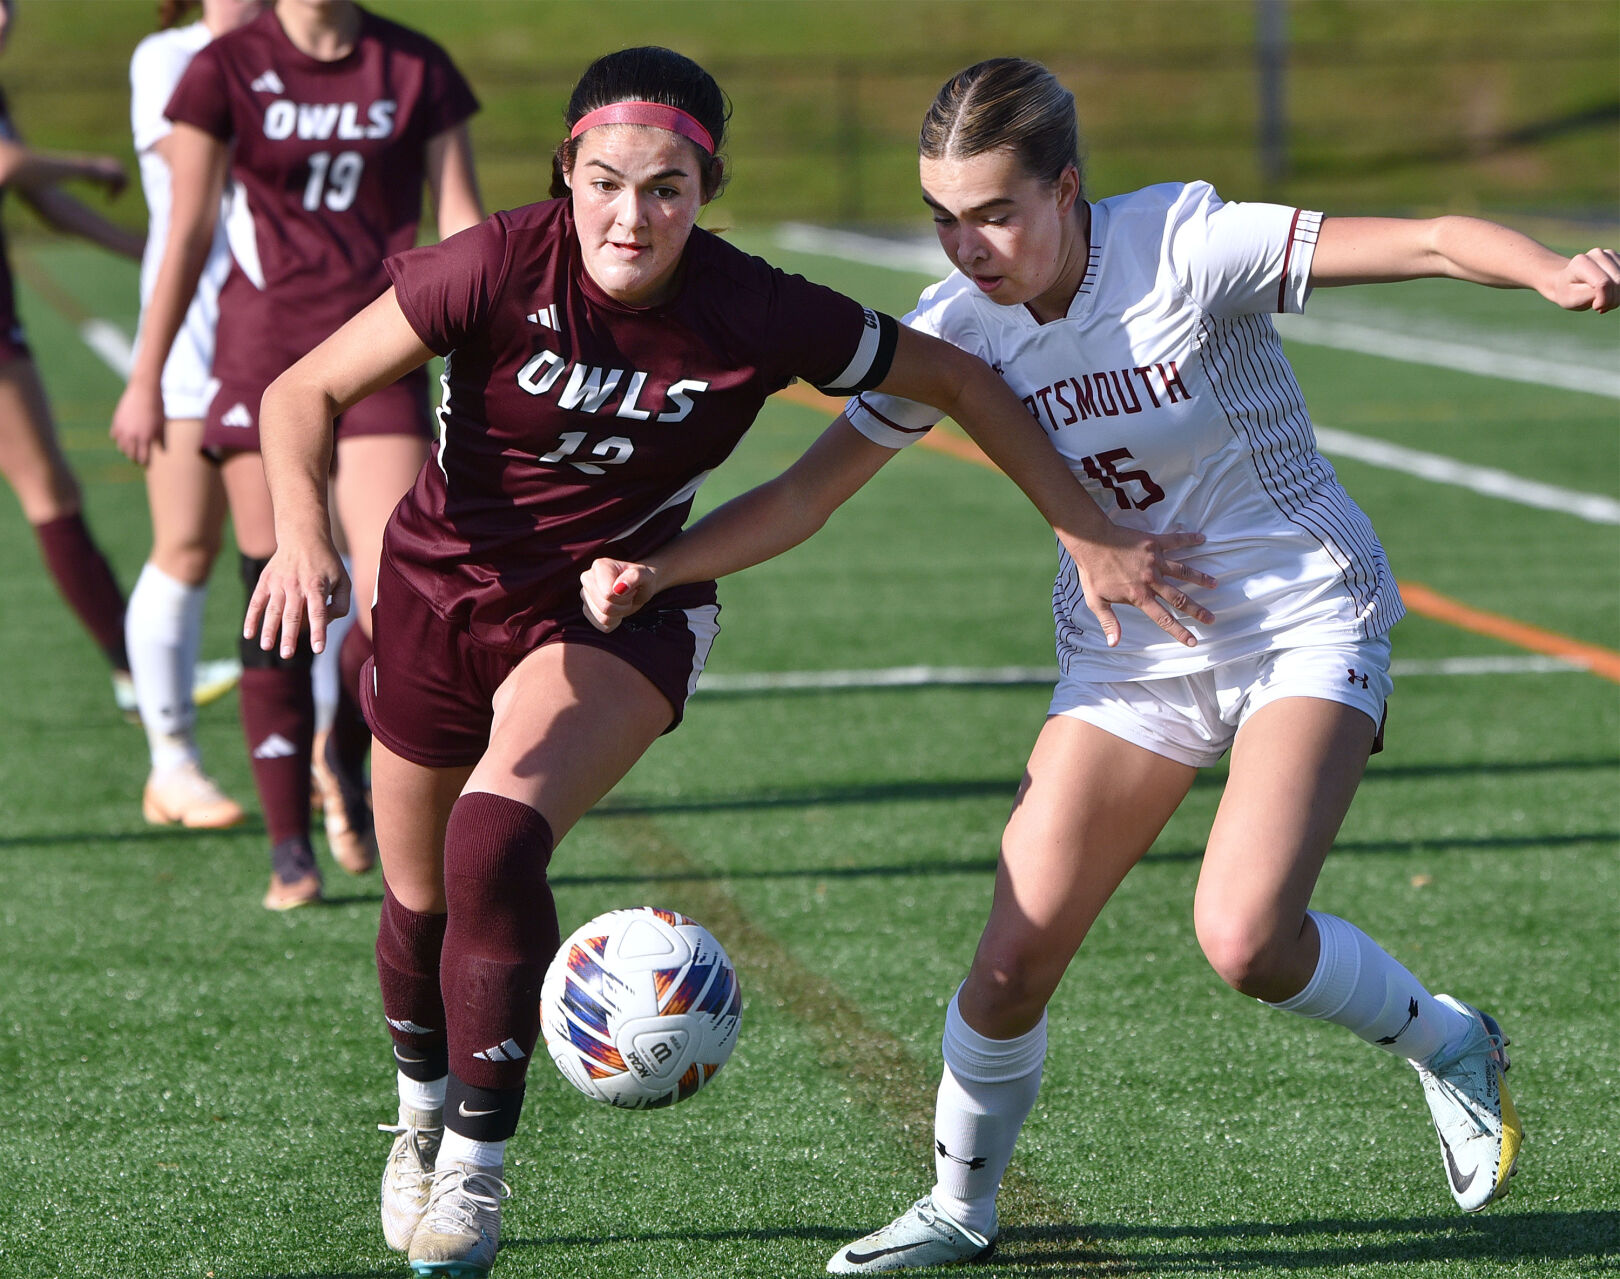 Timberlane’s Morrier, Sayers top New Hampshire Twin State soccer team honorees